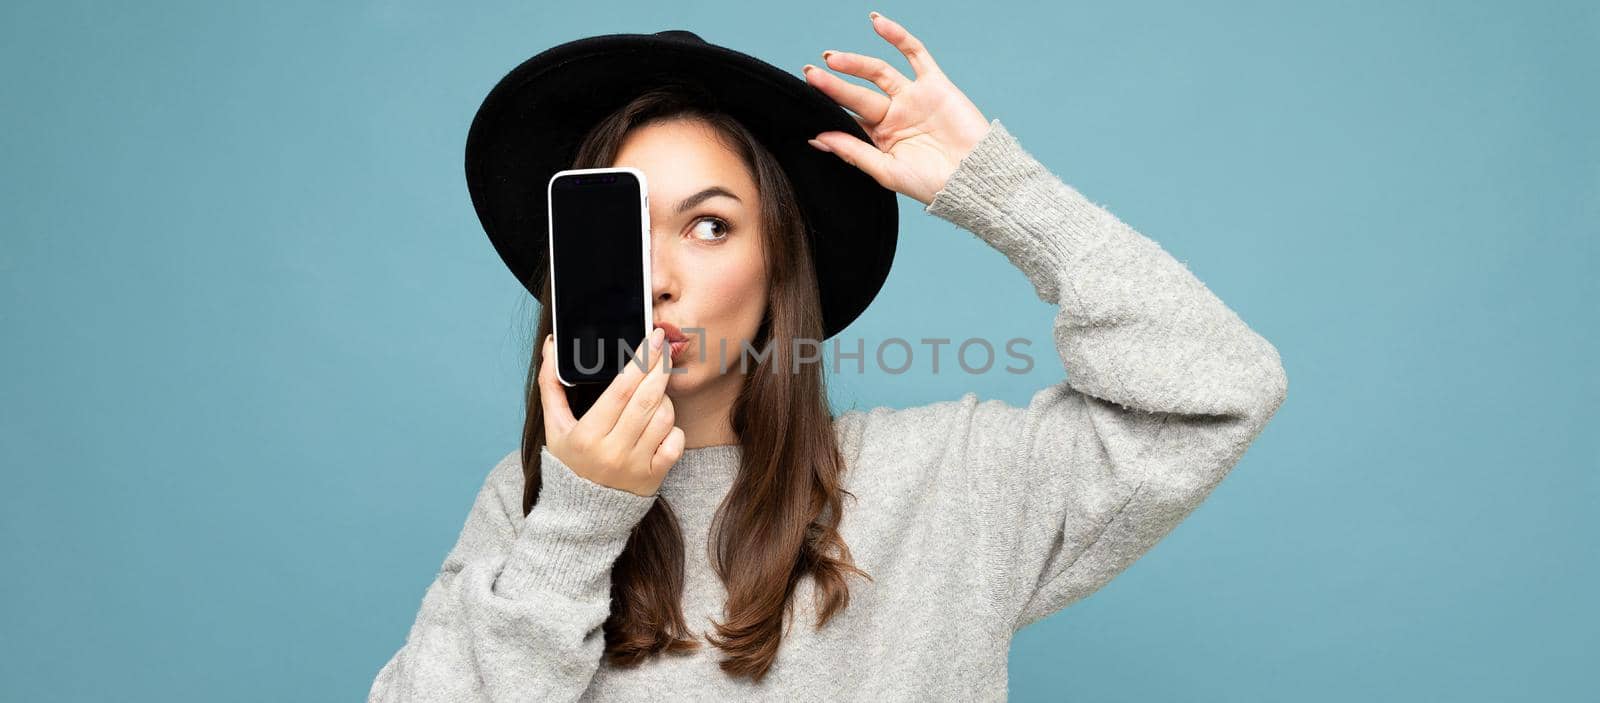 panoramic Photo of Beautiful amazed positive woman wearing black hat and grey sweater holding mobilephone showing smartphone isolated on background looking to the side by TRMK